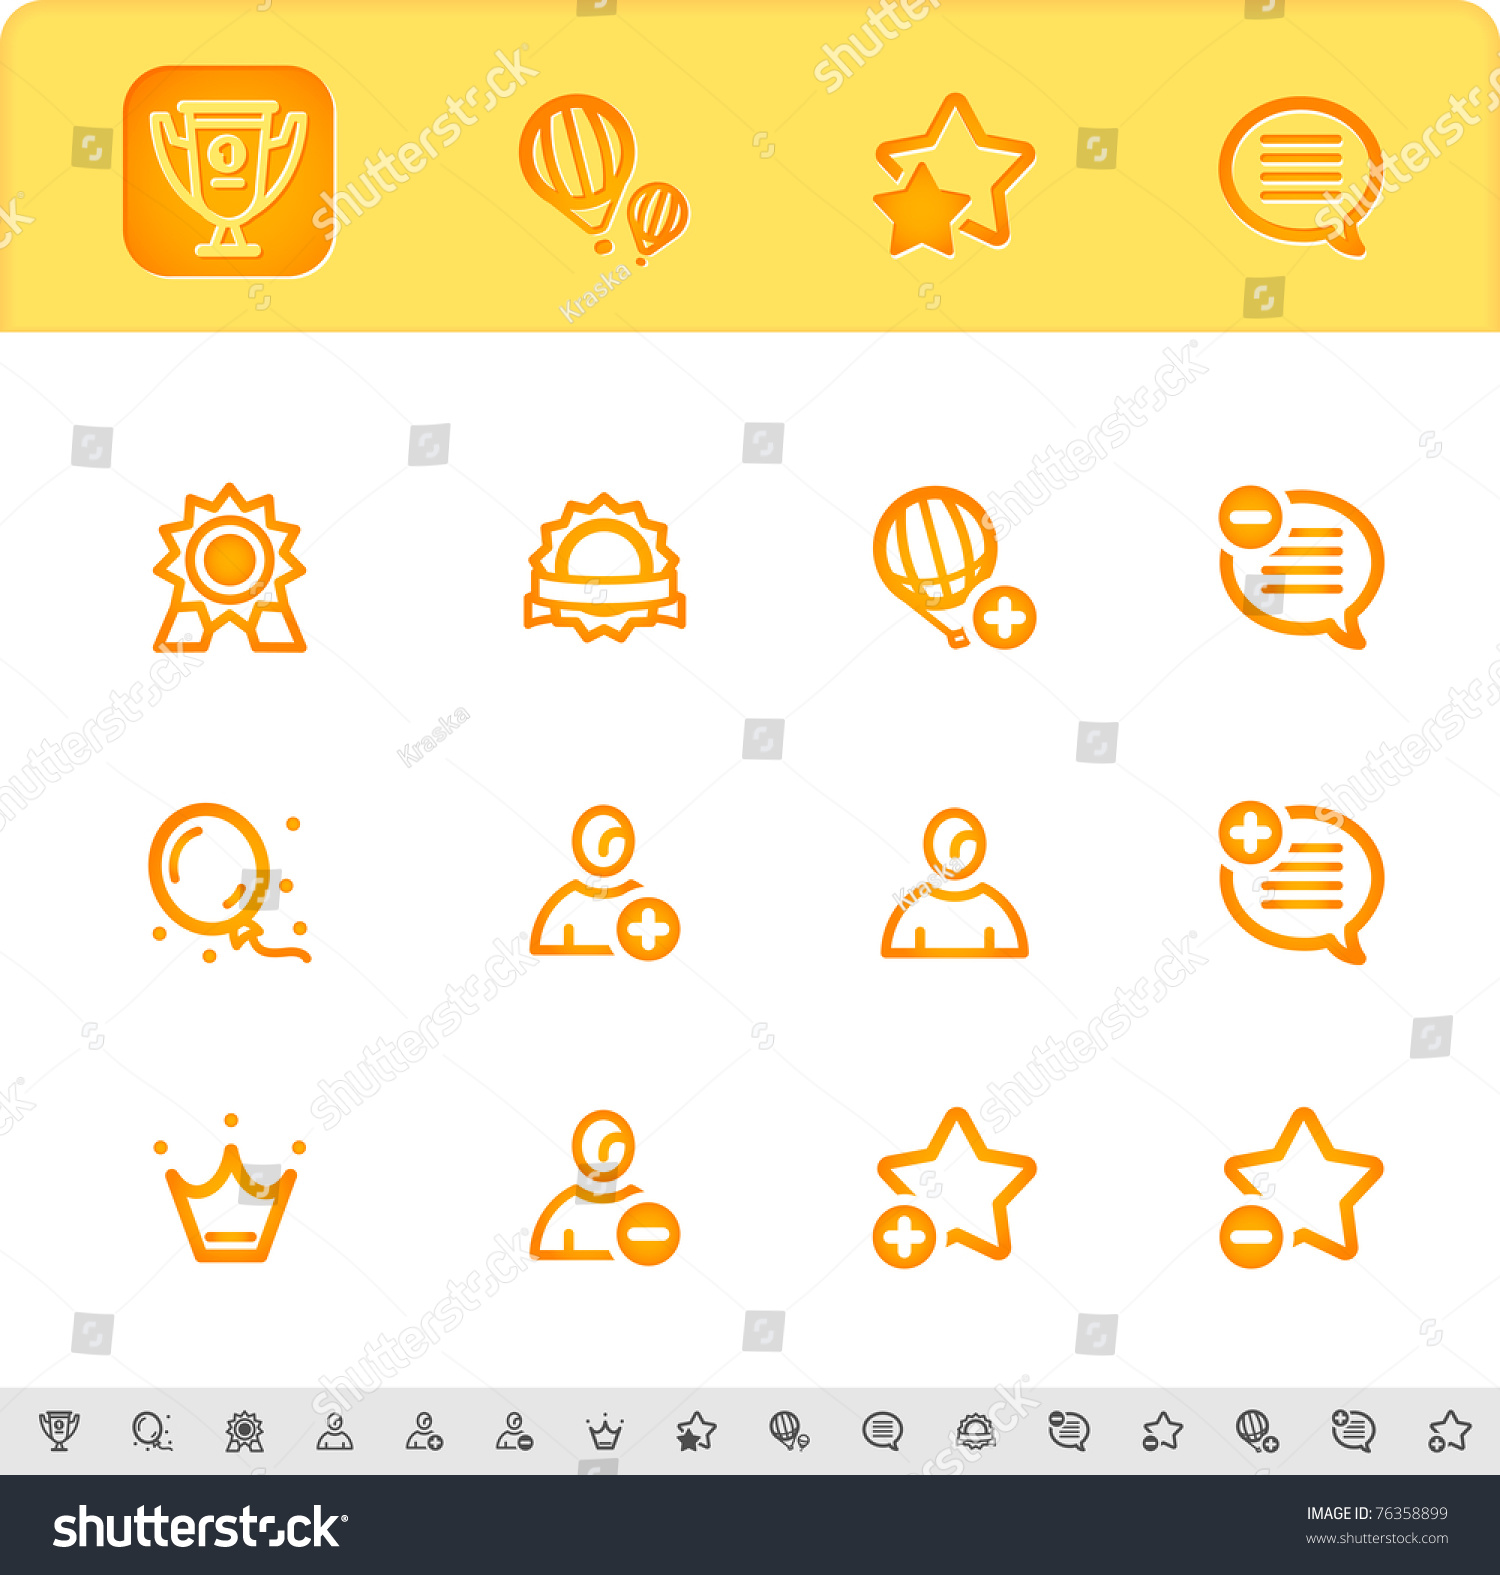 SVG of award, first place and favorite icons set svg